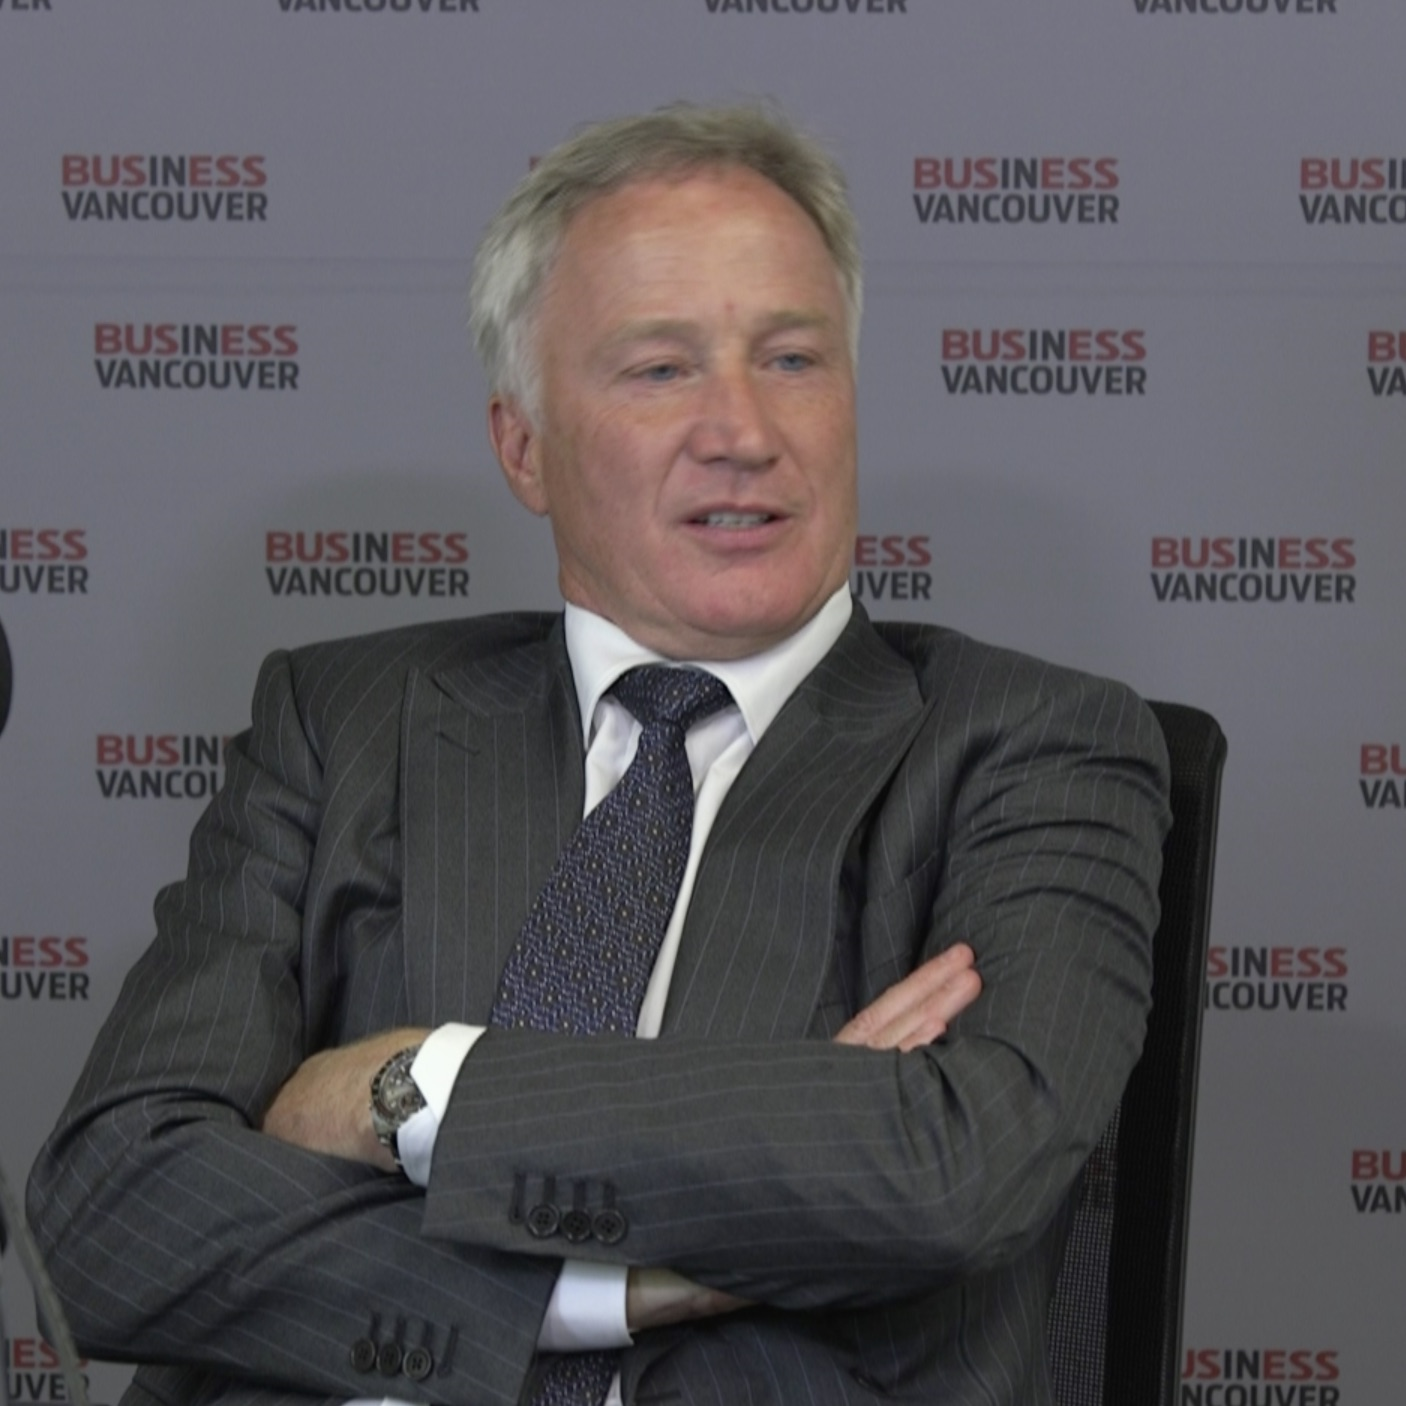 BIV Interview (episode 4): Life and times of Andrew Bibby, Grosvenor Americas CEO